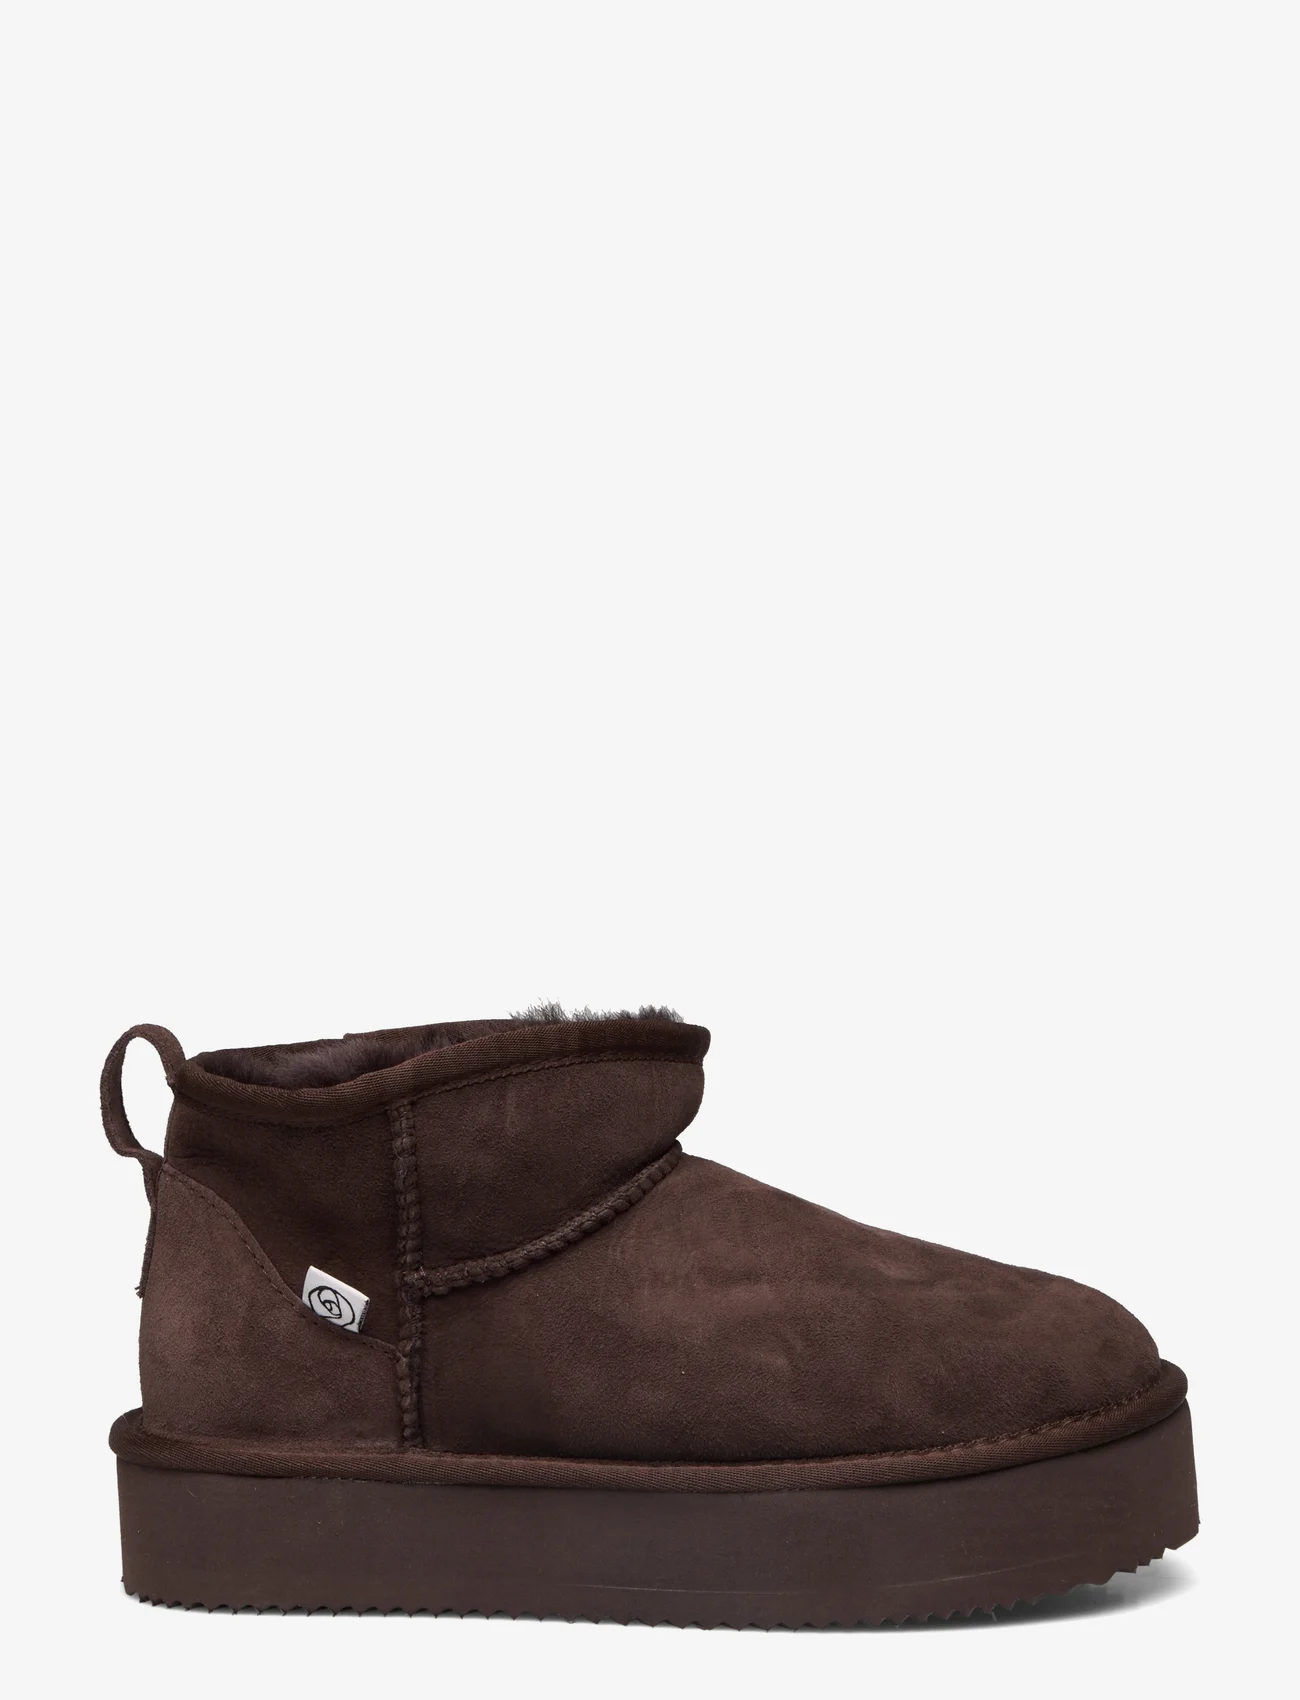 Rosemunde - Shearling boots - kobiety - coffee brown - 1